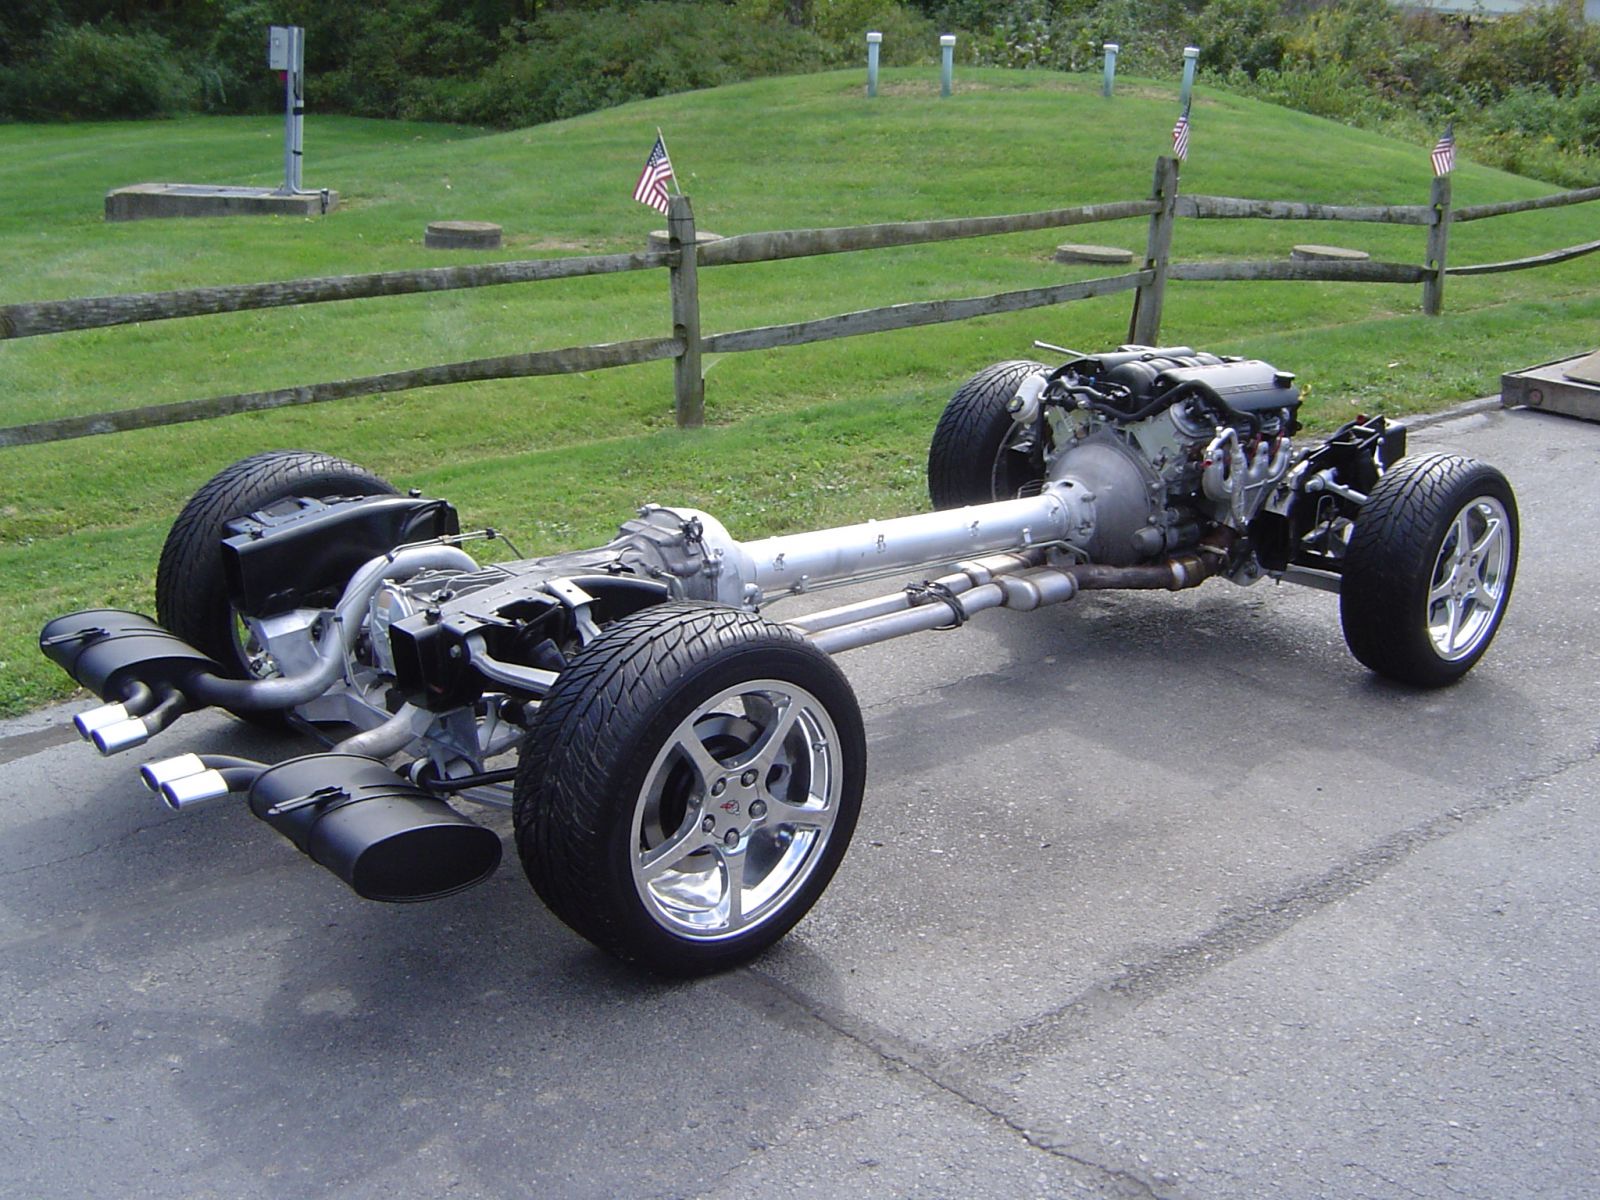 Panhead rolling chassis for sale.